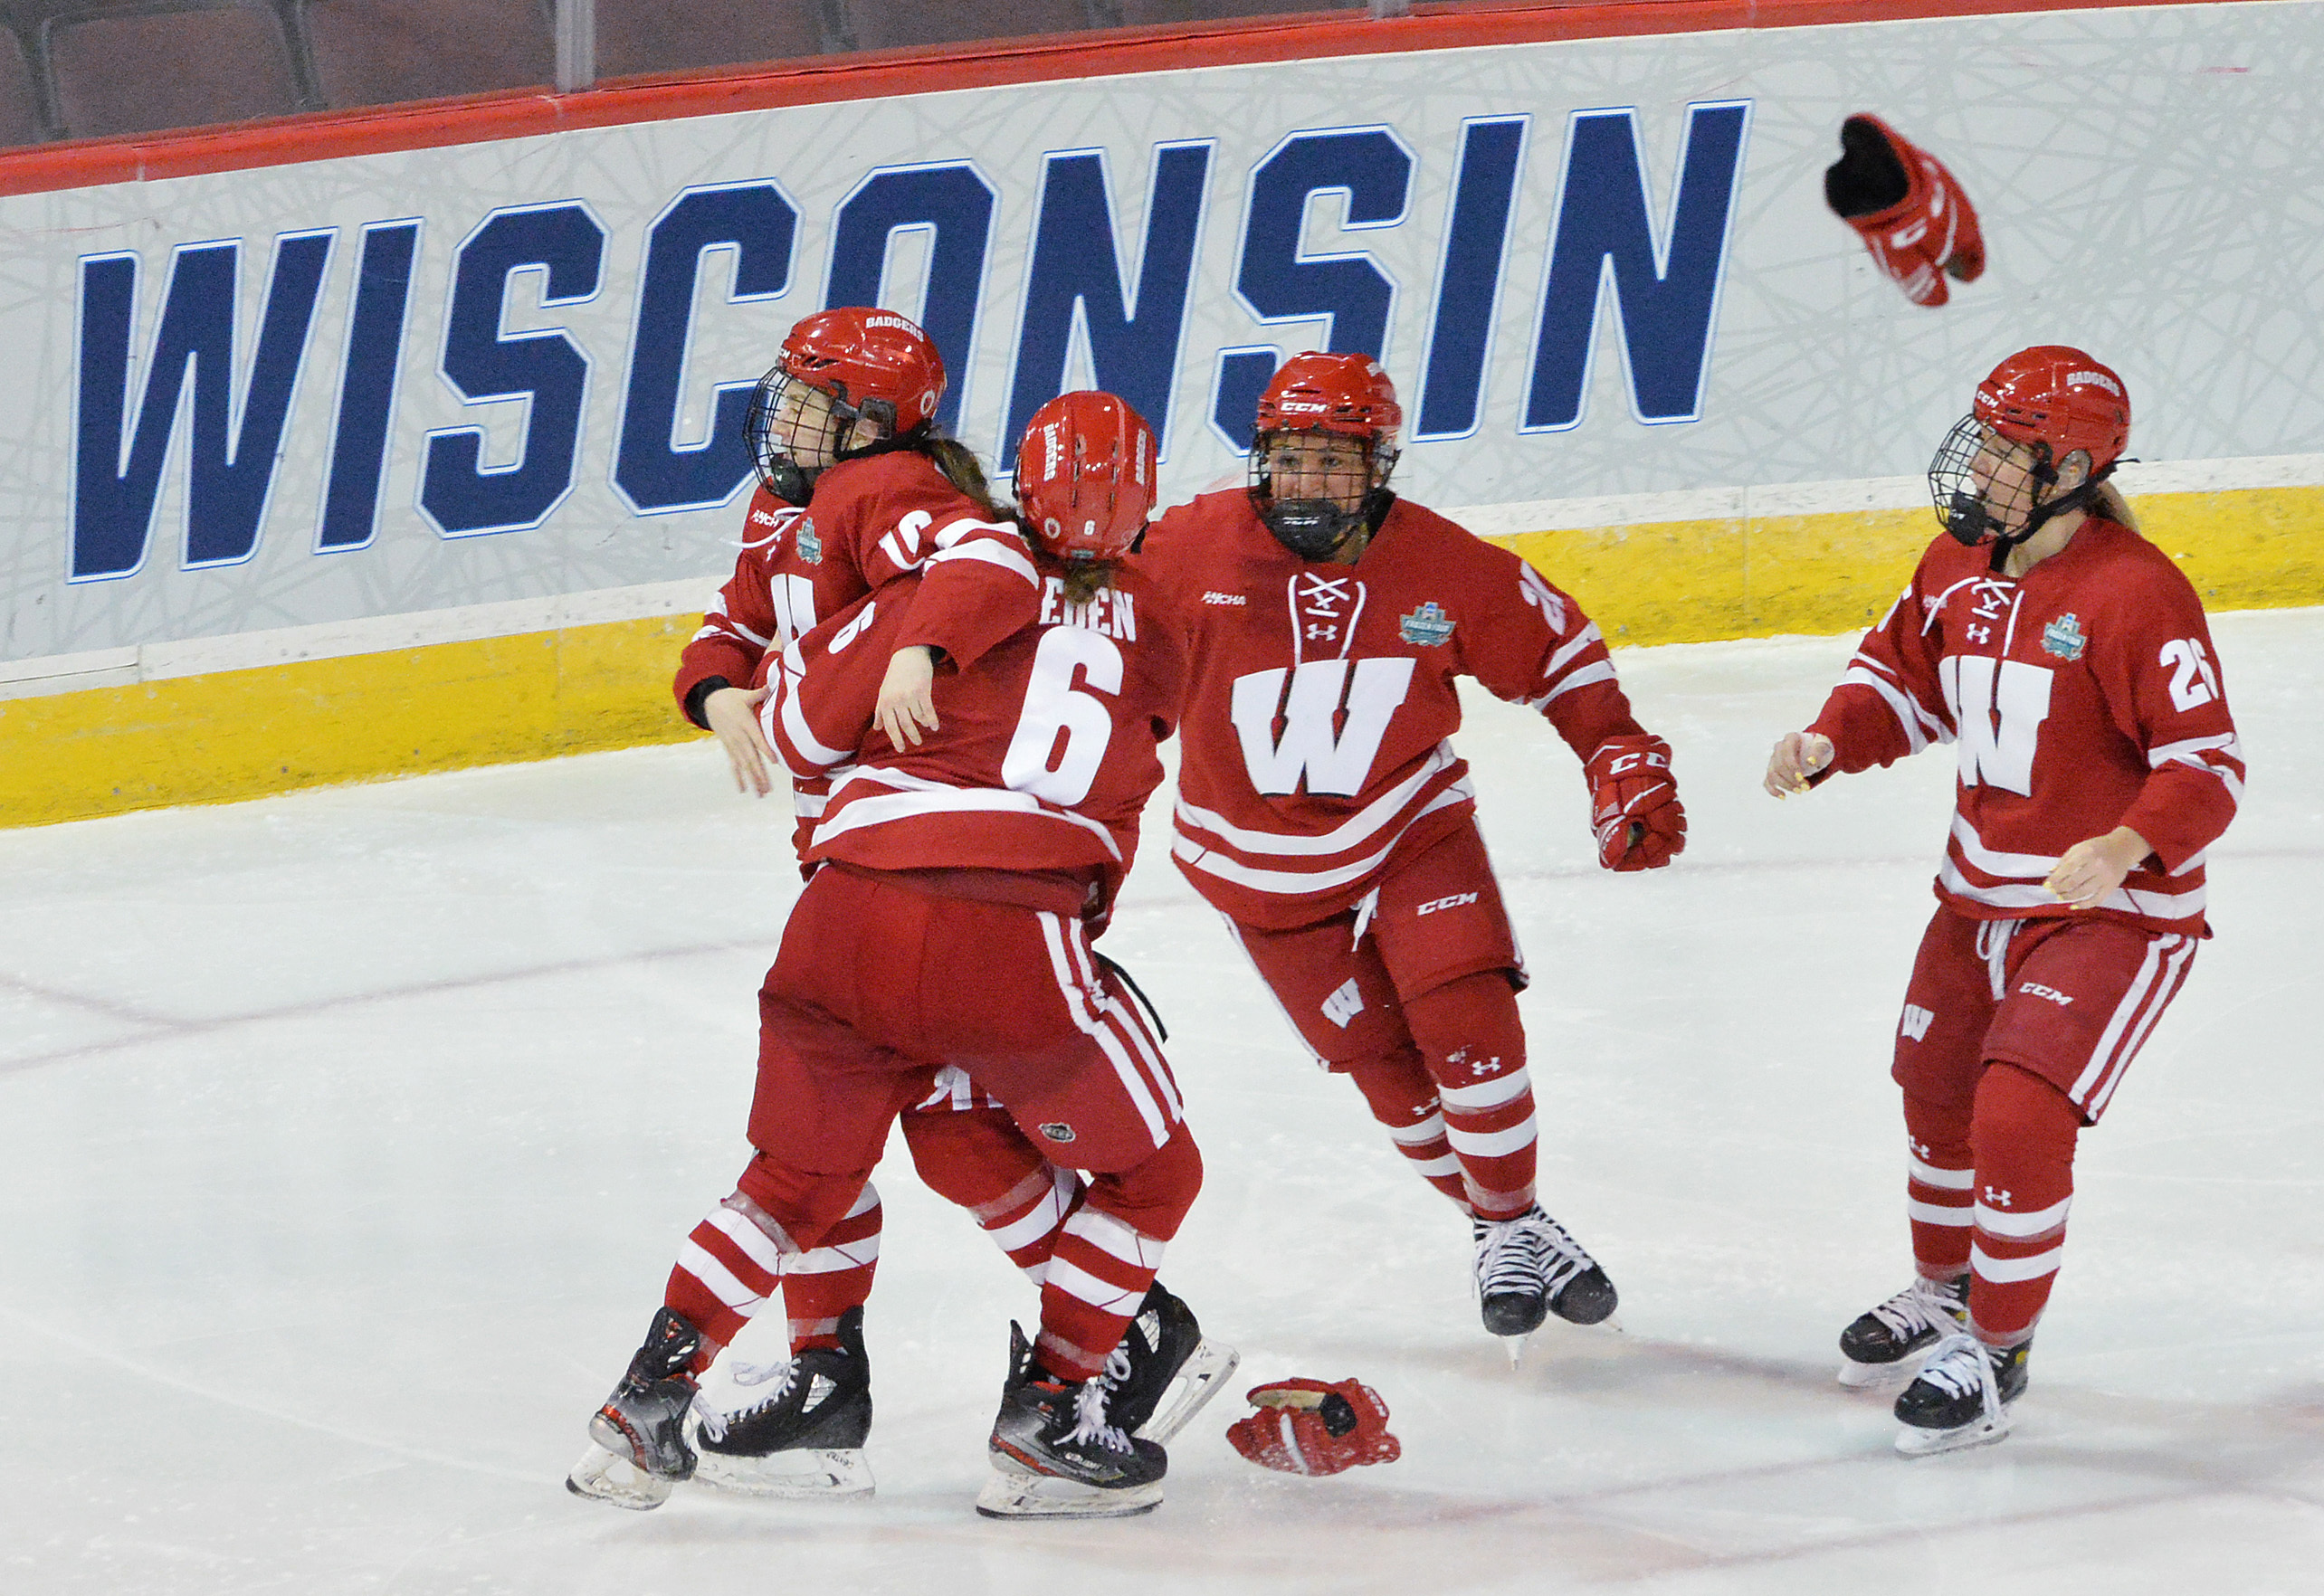 NCAA ice hockey championship schedule 2021 Time, TV channel, live stream, how to watch road to the Frozen Four